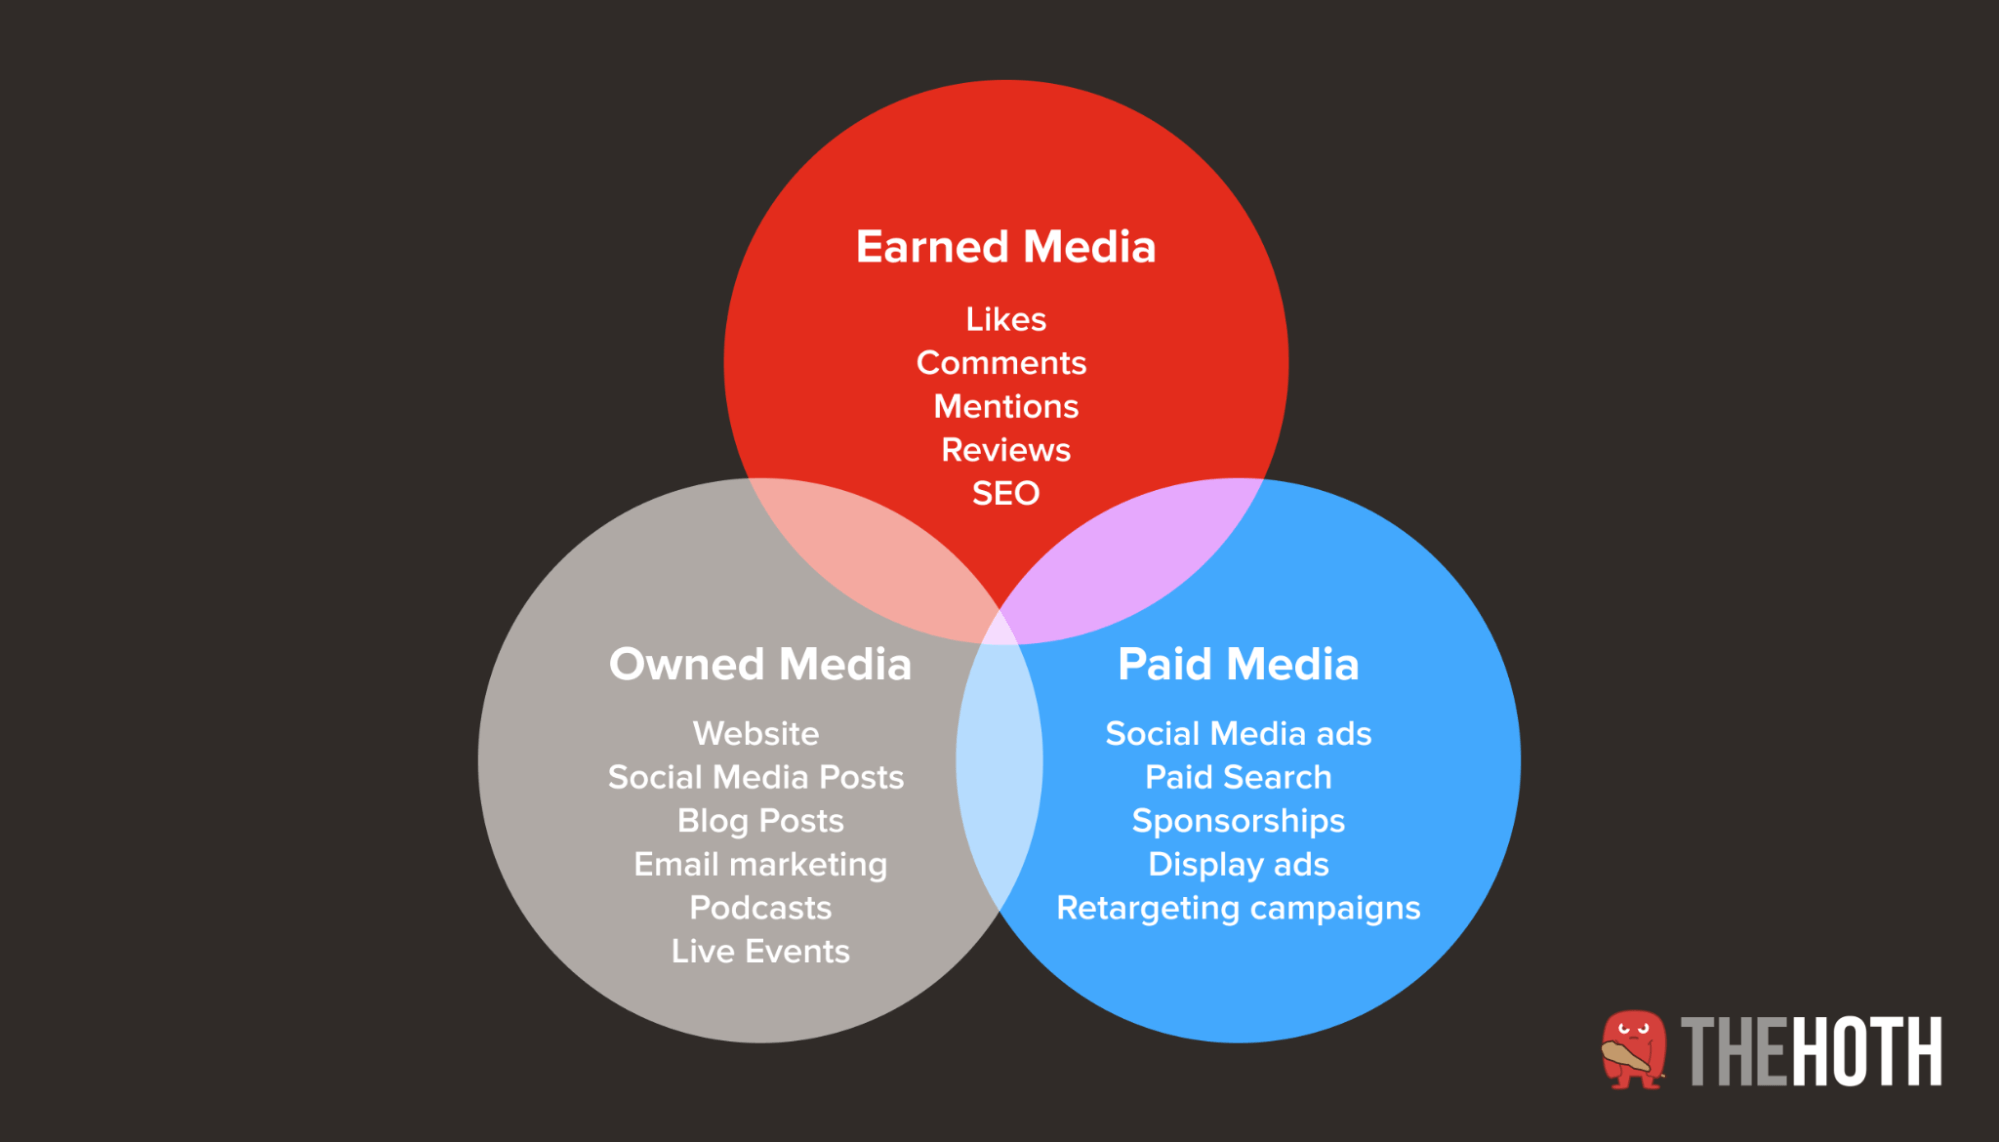 Explaining the differences between paid, owned, and earned media